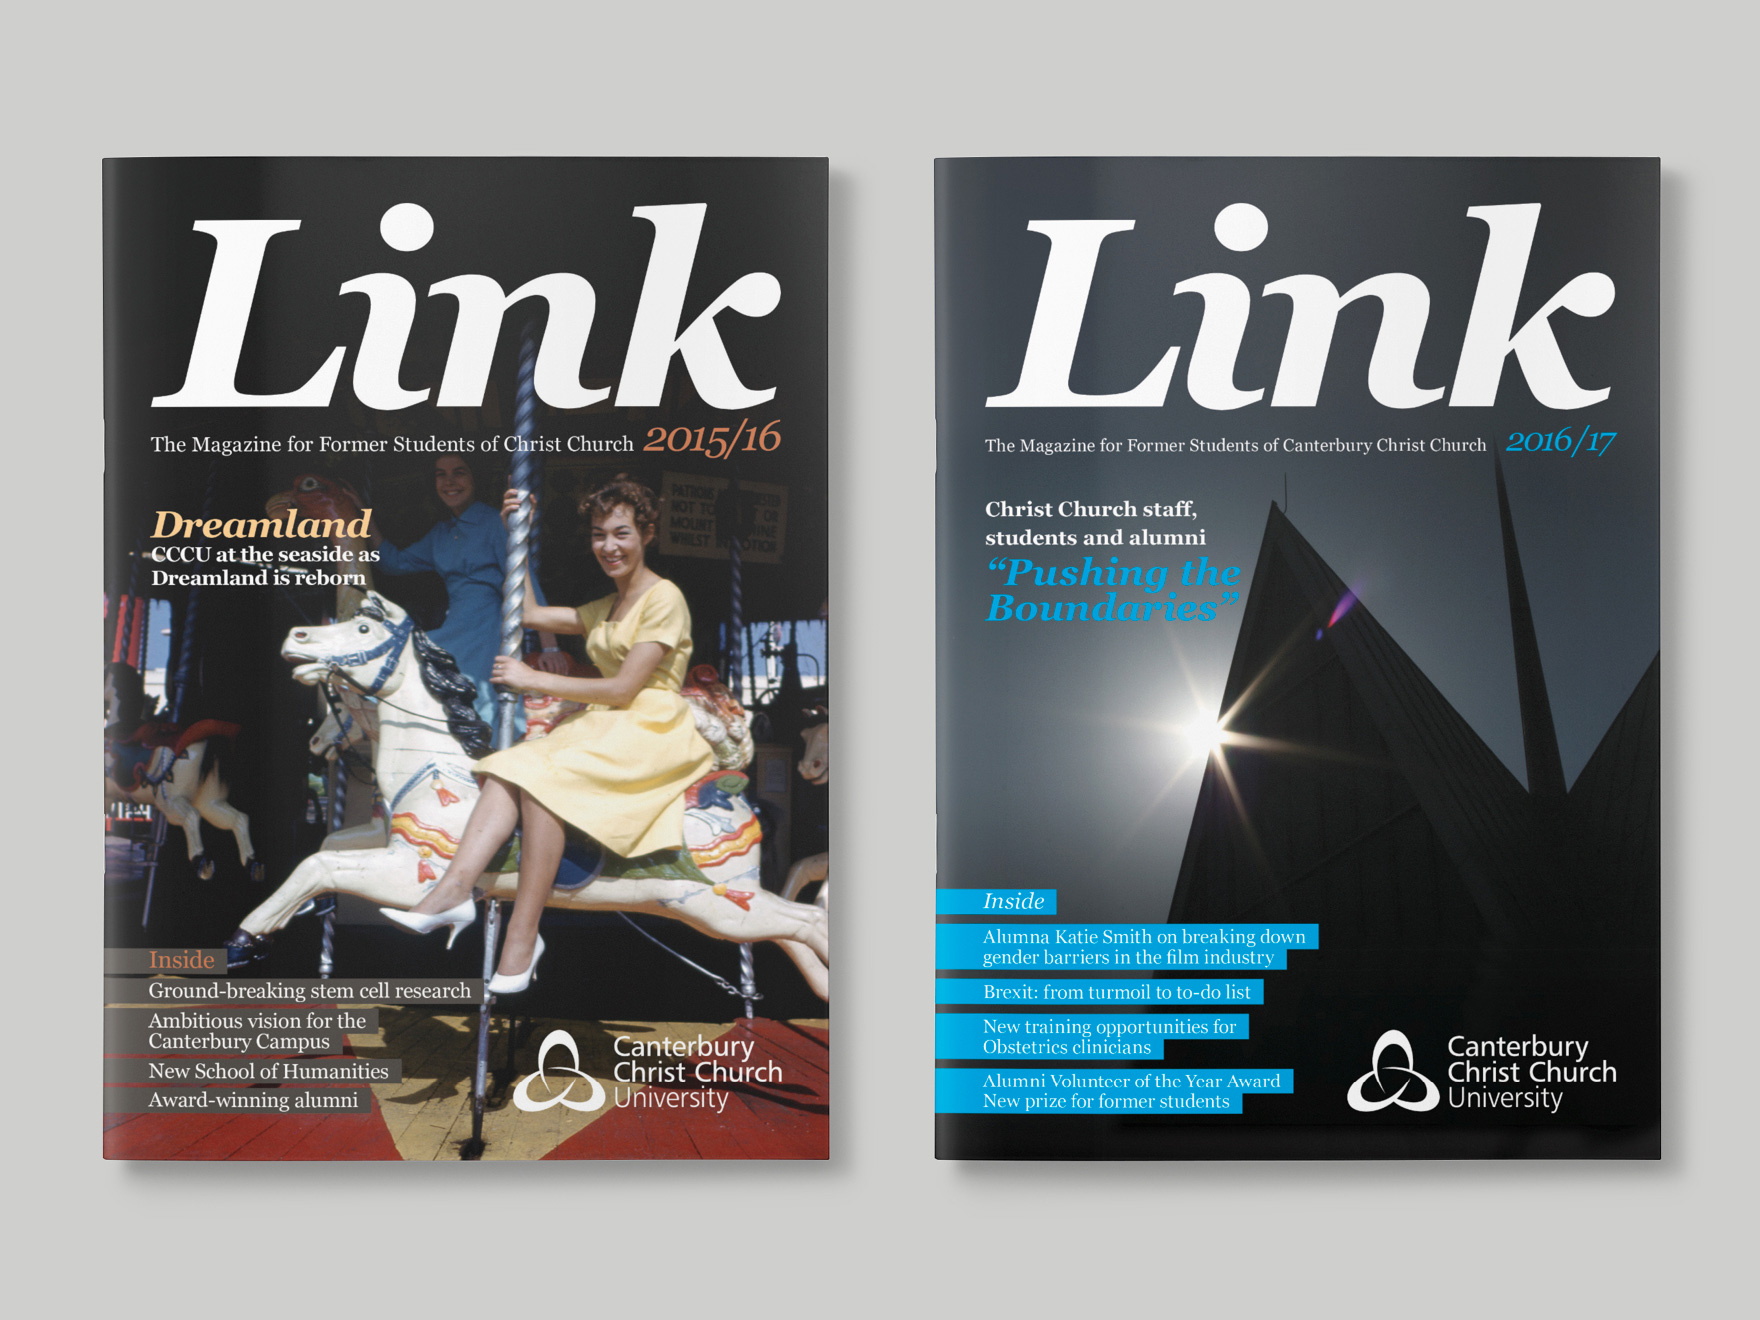 Front covers of the 2015 and 2016 issues of issue of Link magazine